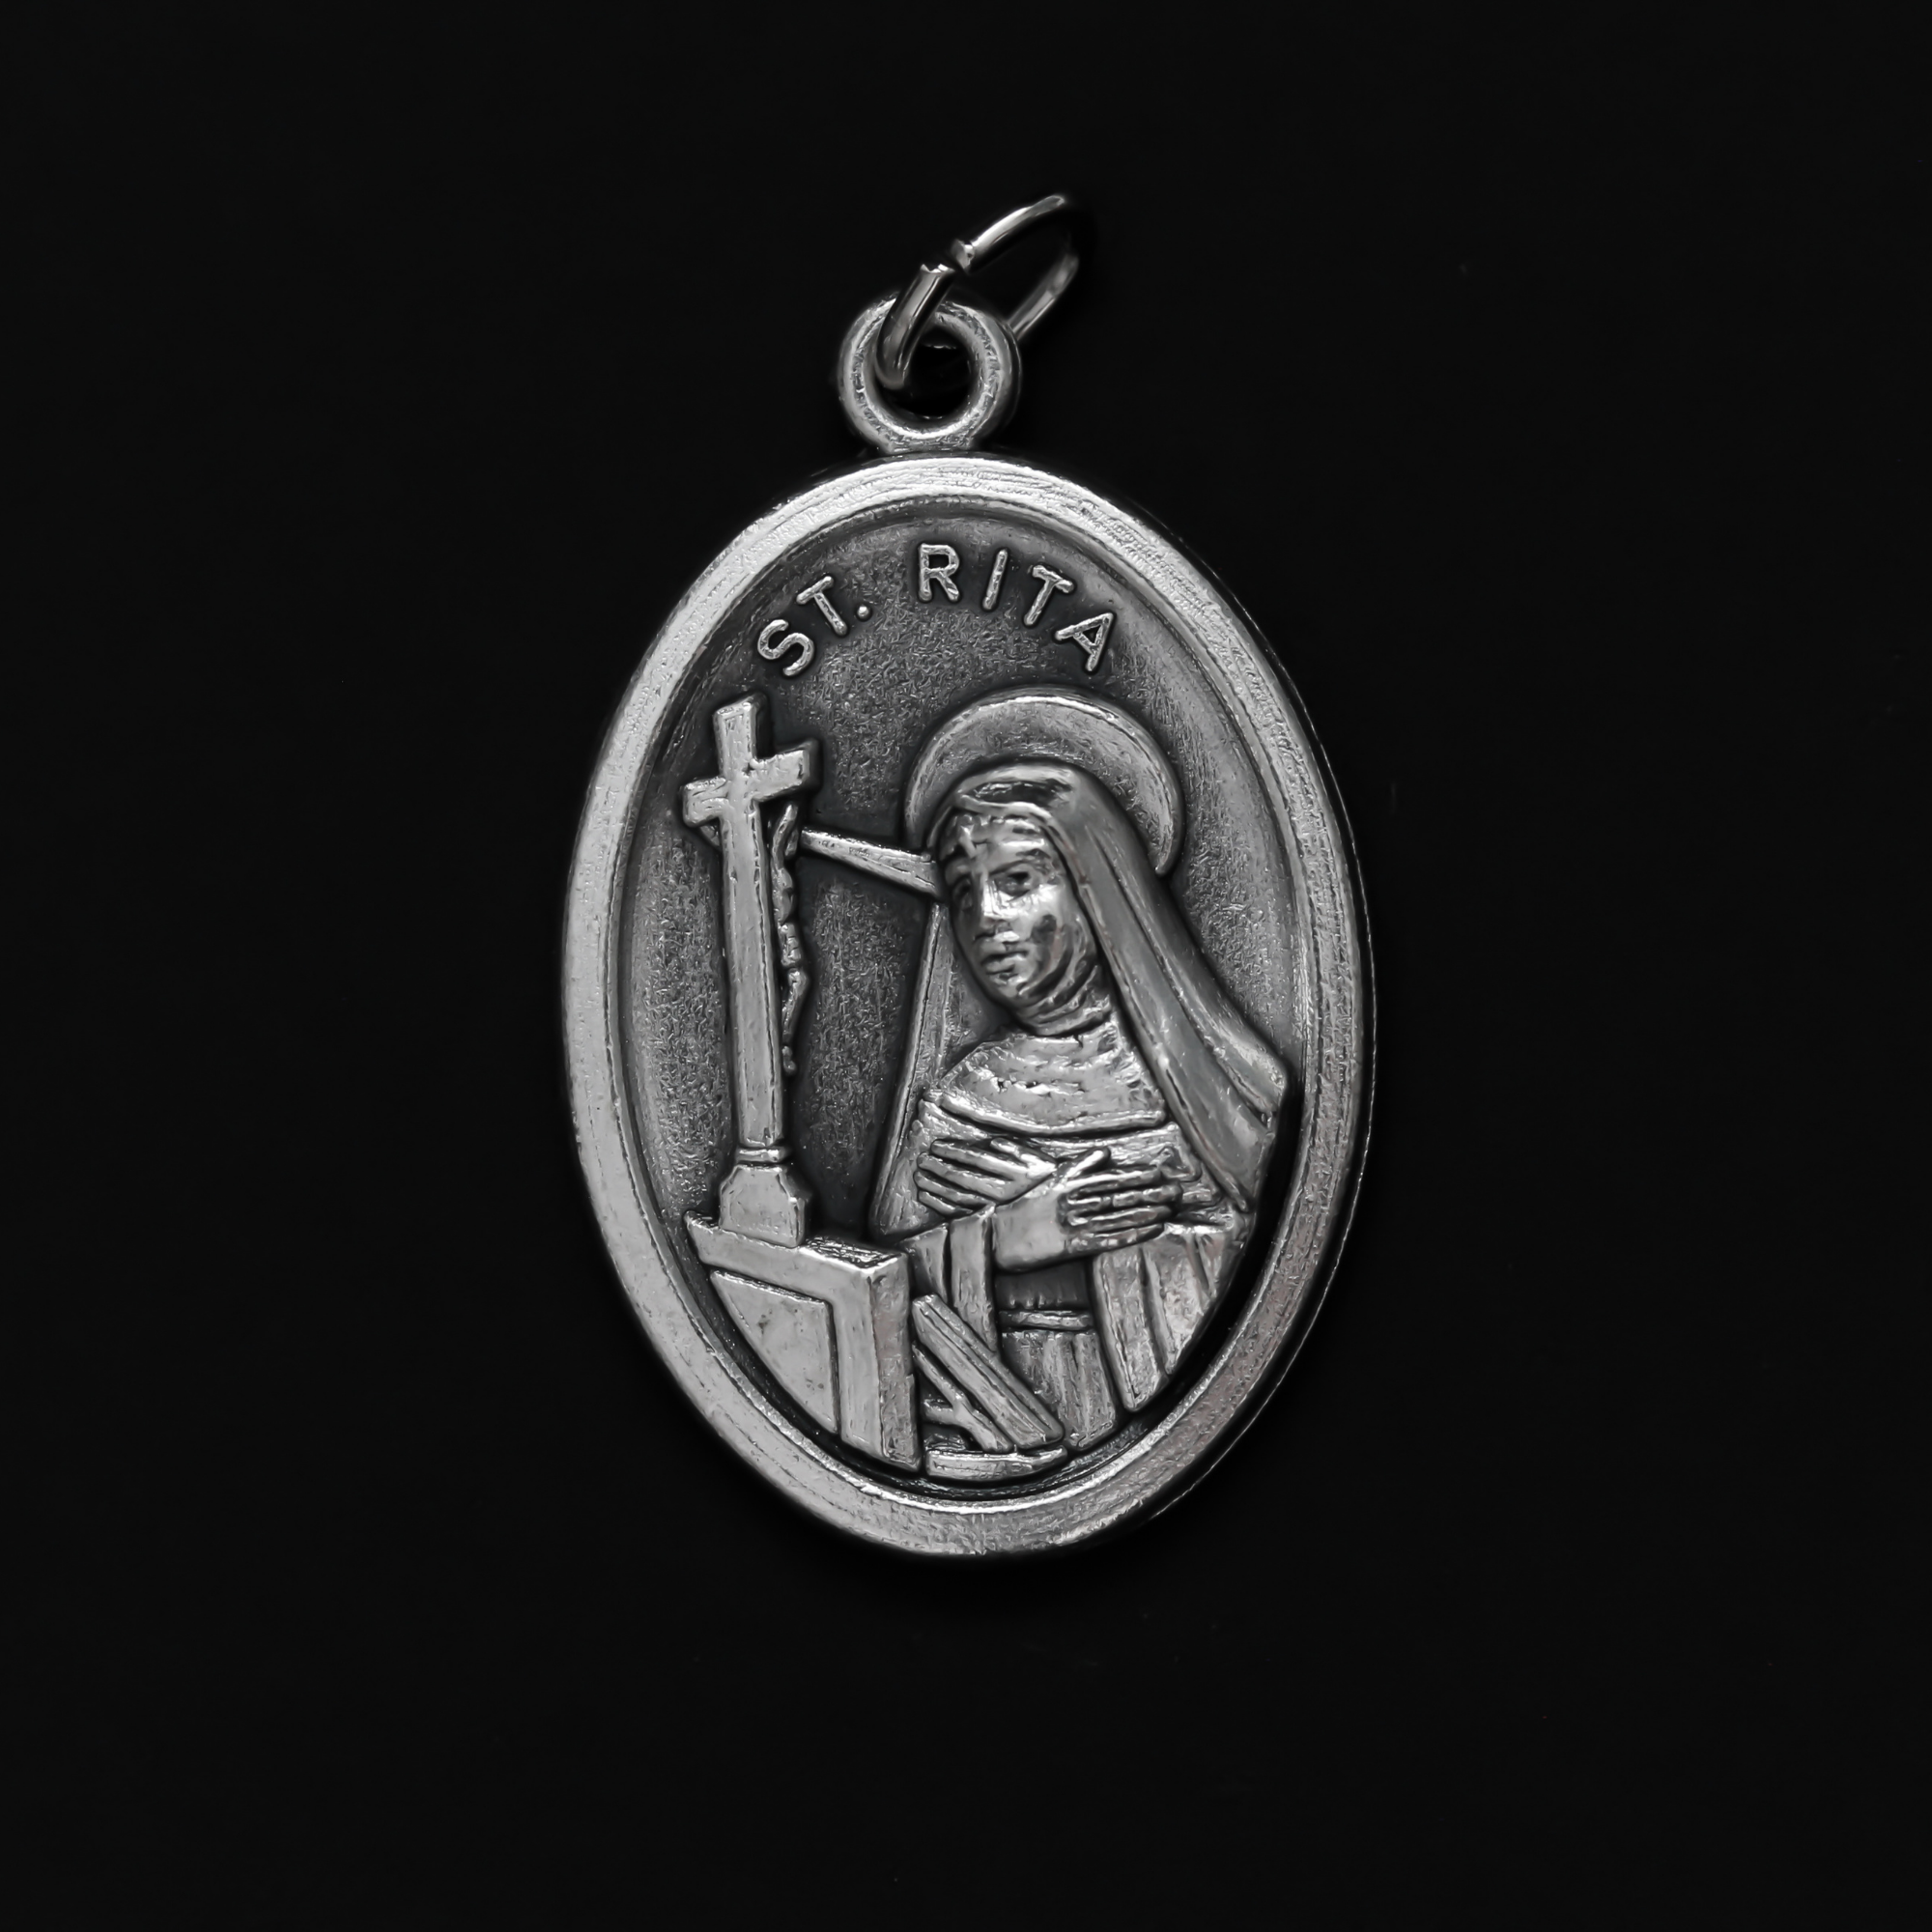 Saint Rita medal that depicts the saint on the front and "Pray For Us" on the back